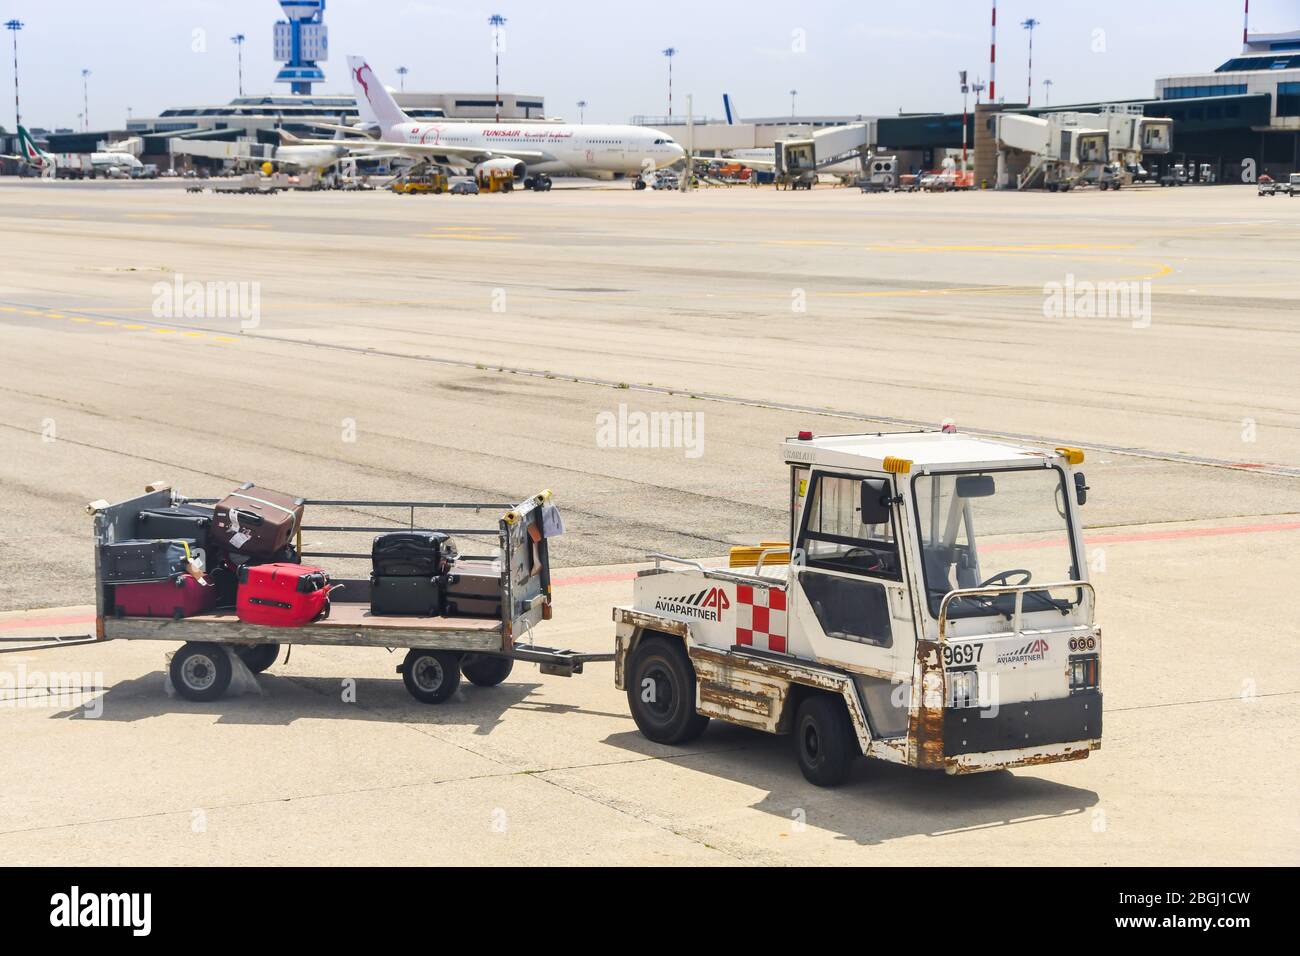 MILAN, ITALY - JUNE 2019: Small tractor with luggage trolleys parked on the apron at Milan Malpensa Airport. In the background is a plane Stock Photo